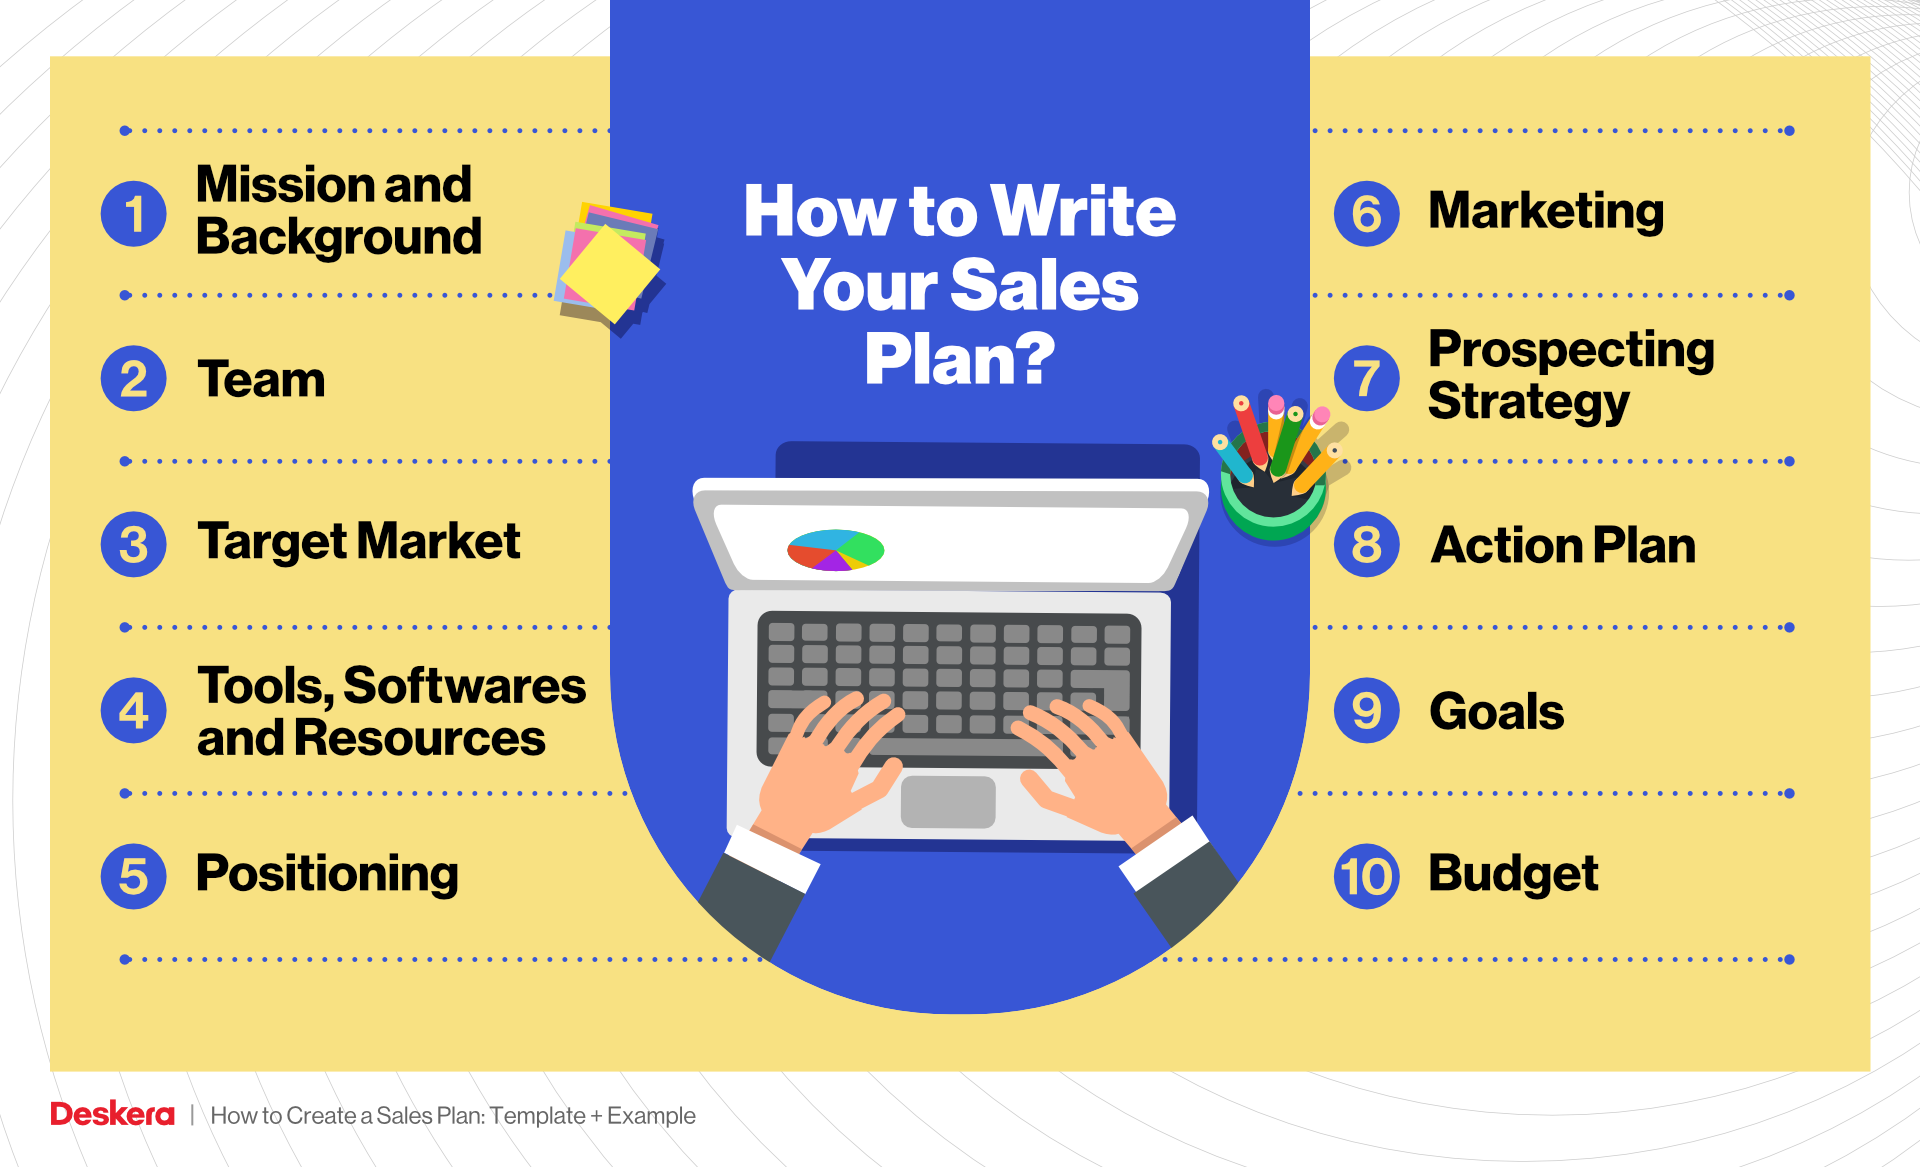 How to Write Your Sales Plan?